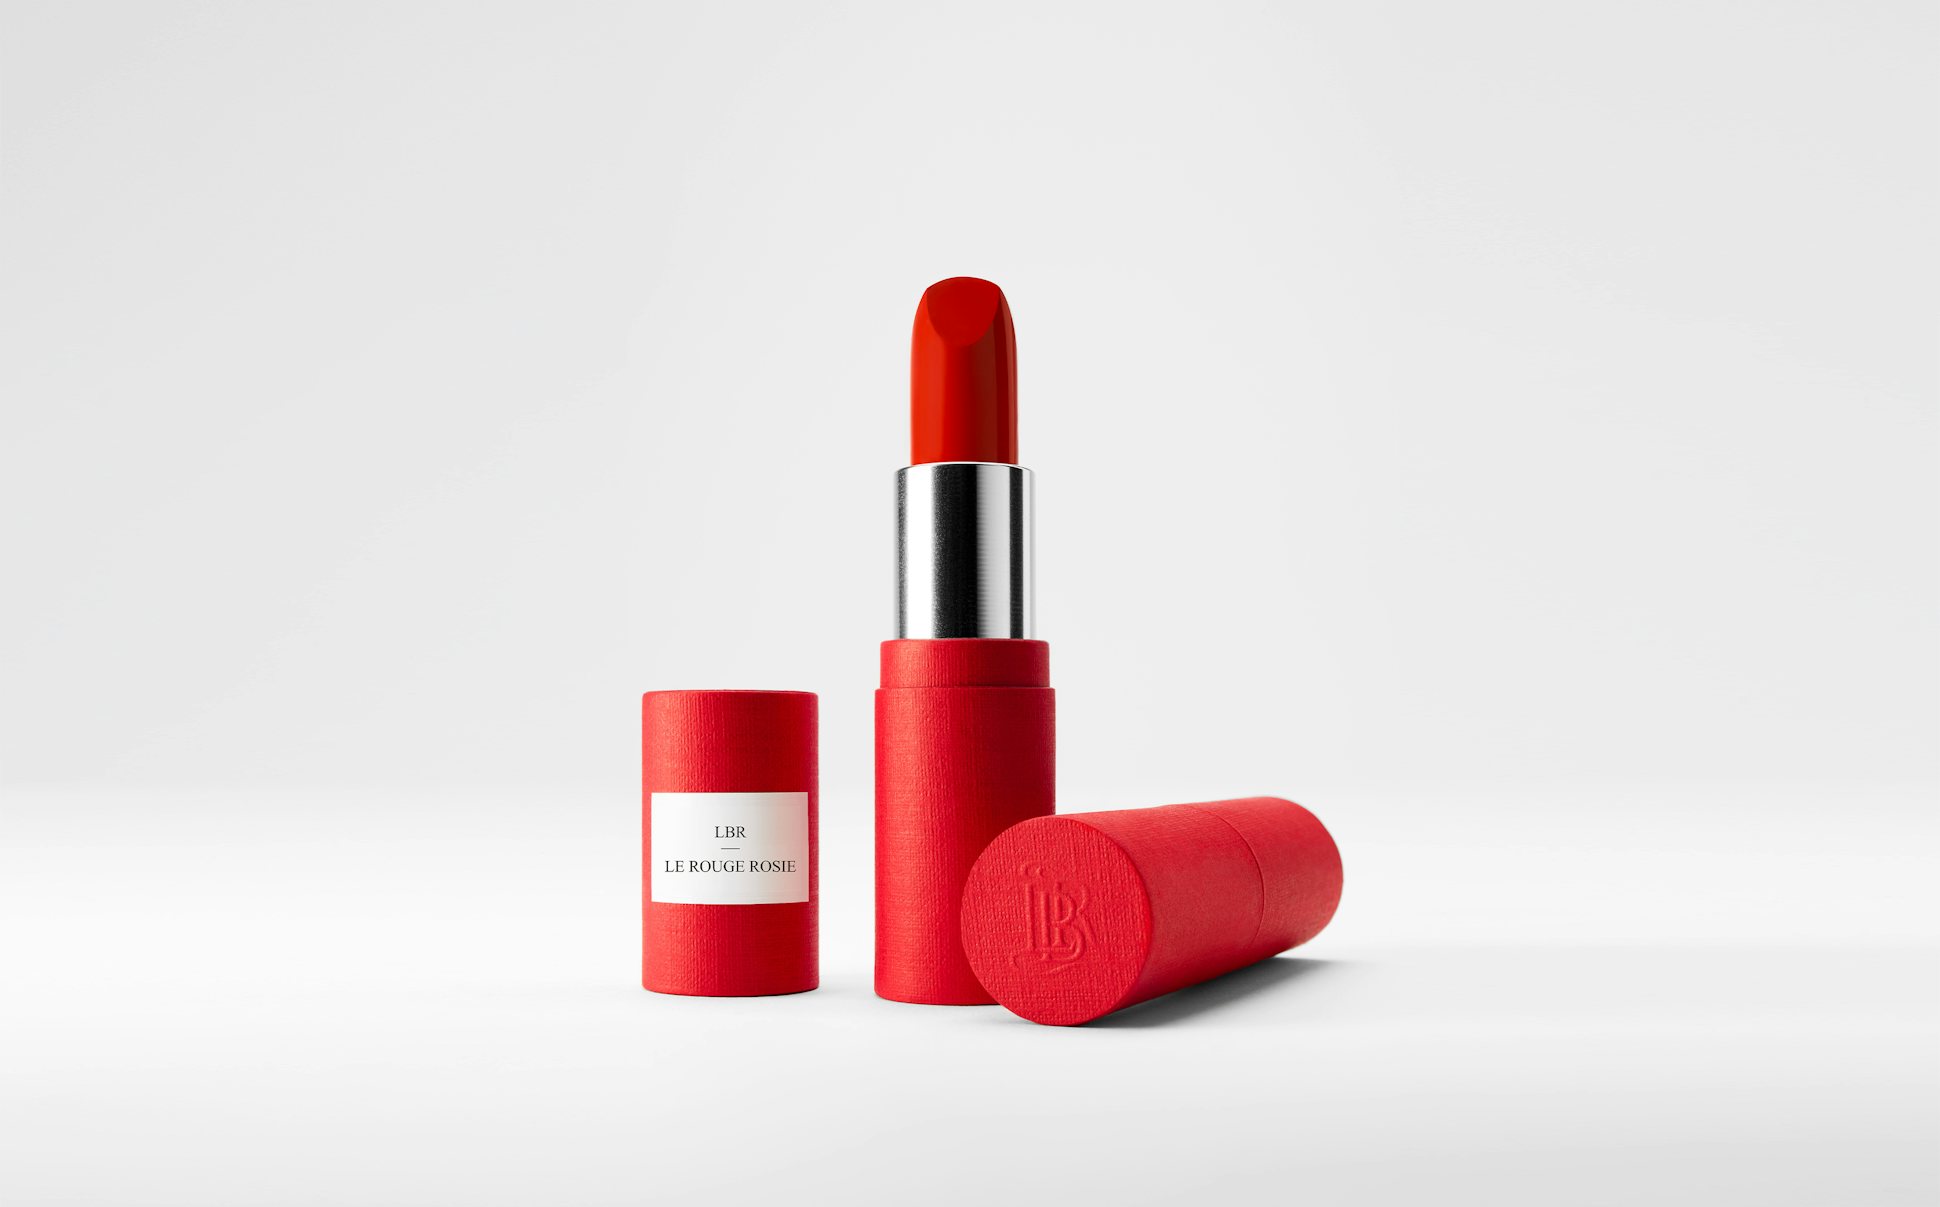 La bouche rouge Le Rouge Rosie lipstick in the red paper case